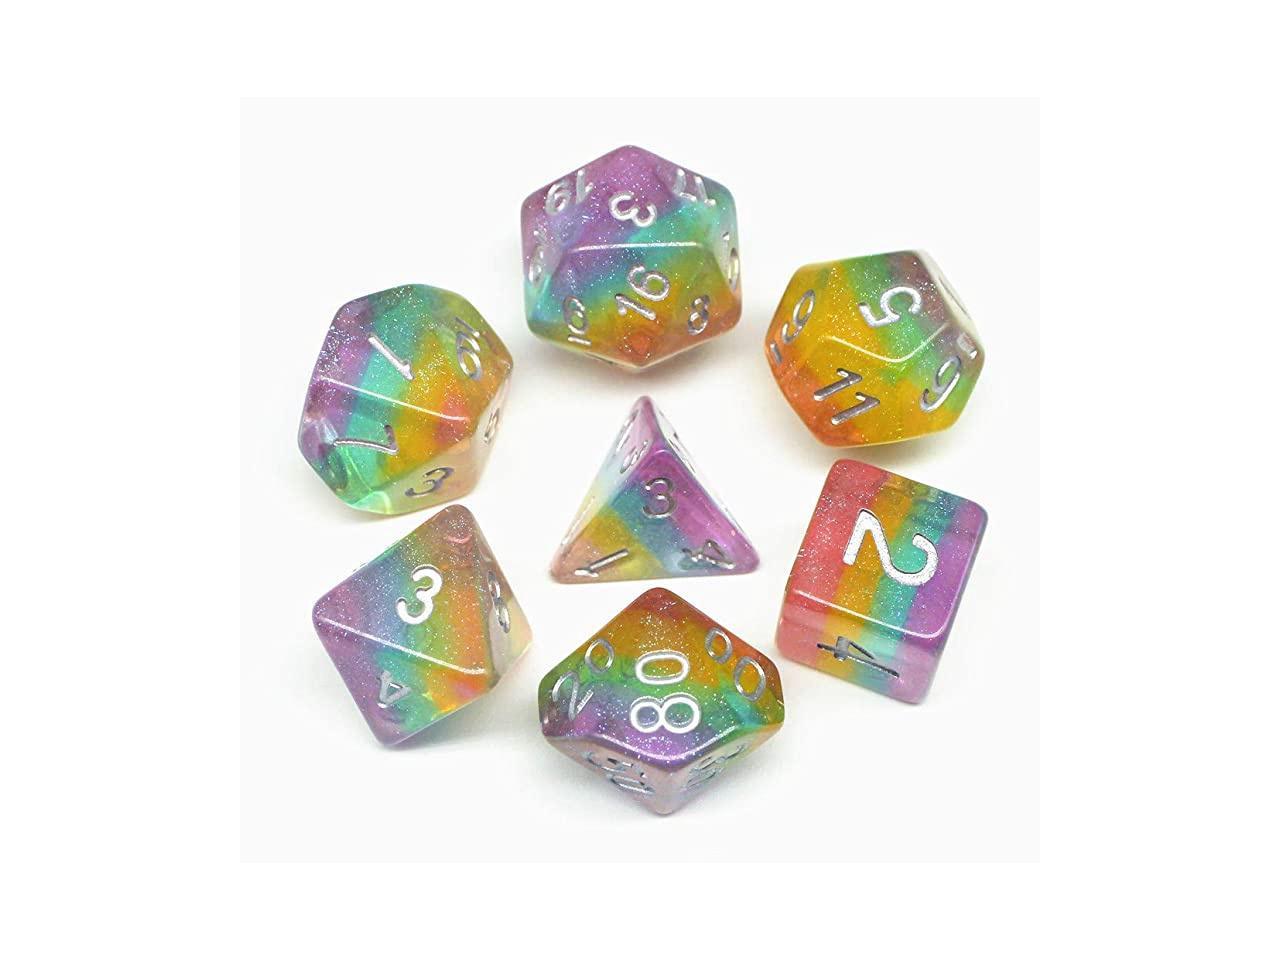 For DND RPG MTG Polyhedral Dice Game Maker 7pcs 4/6/8/10/12/20/% New Hot 2018 